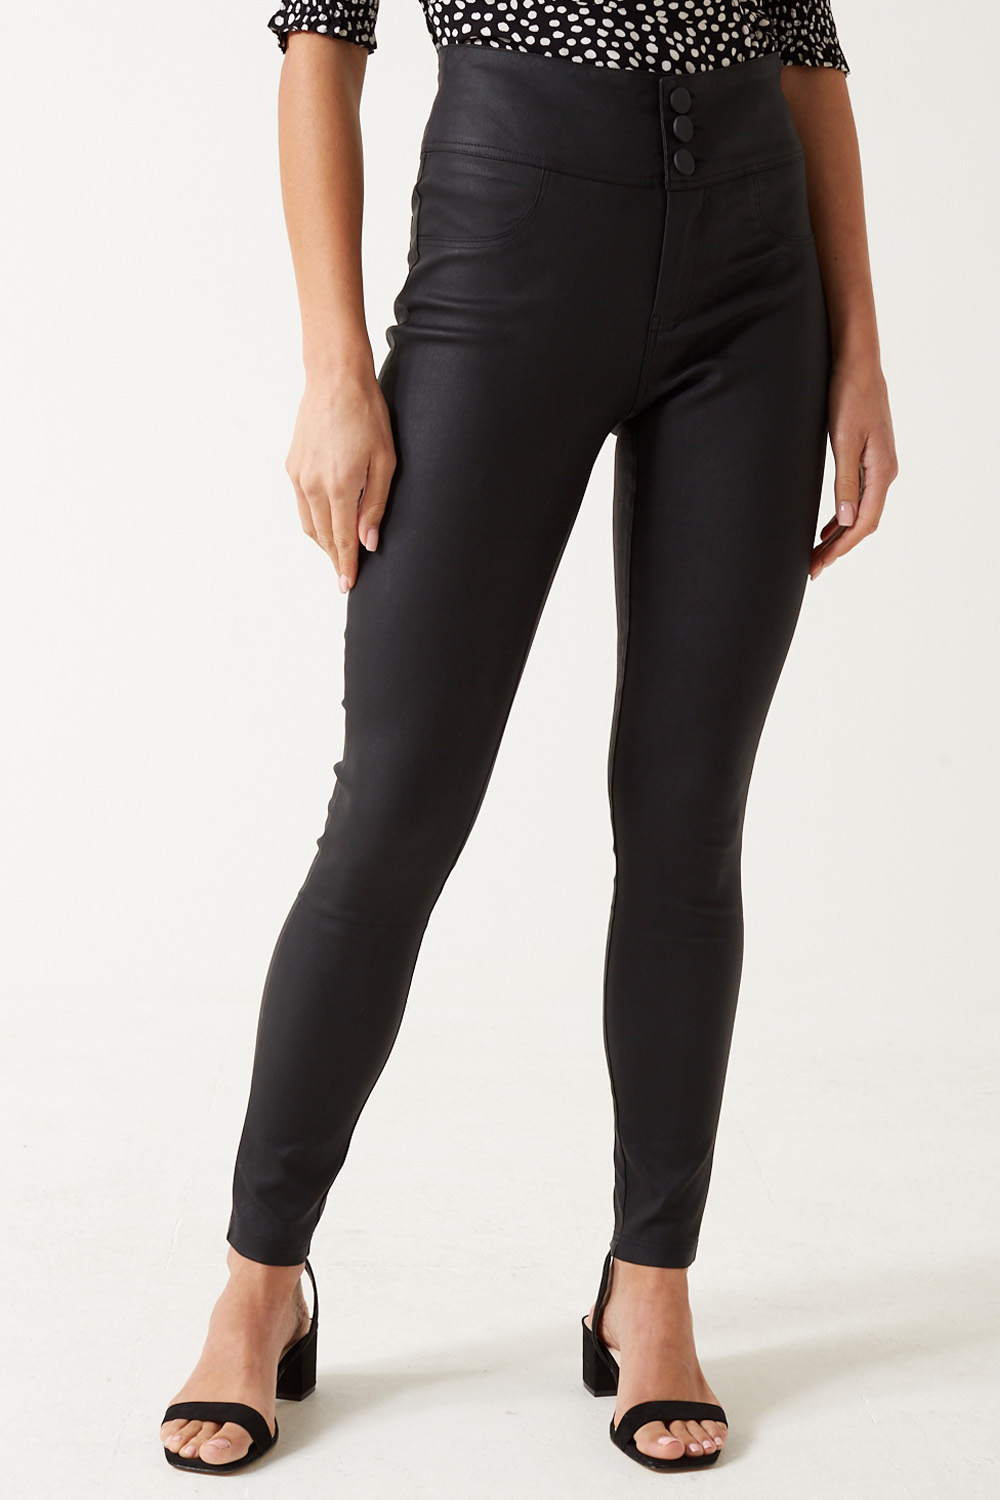 Topshop Tall faux leather skinny fit moto pants in black